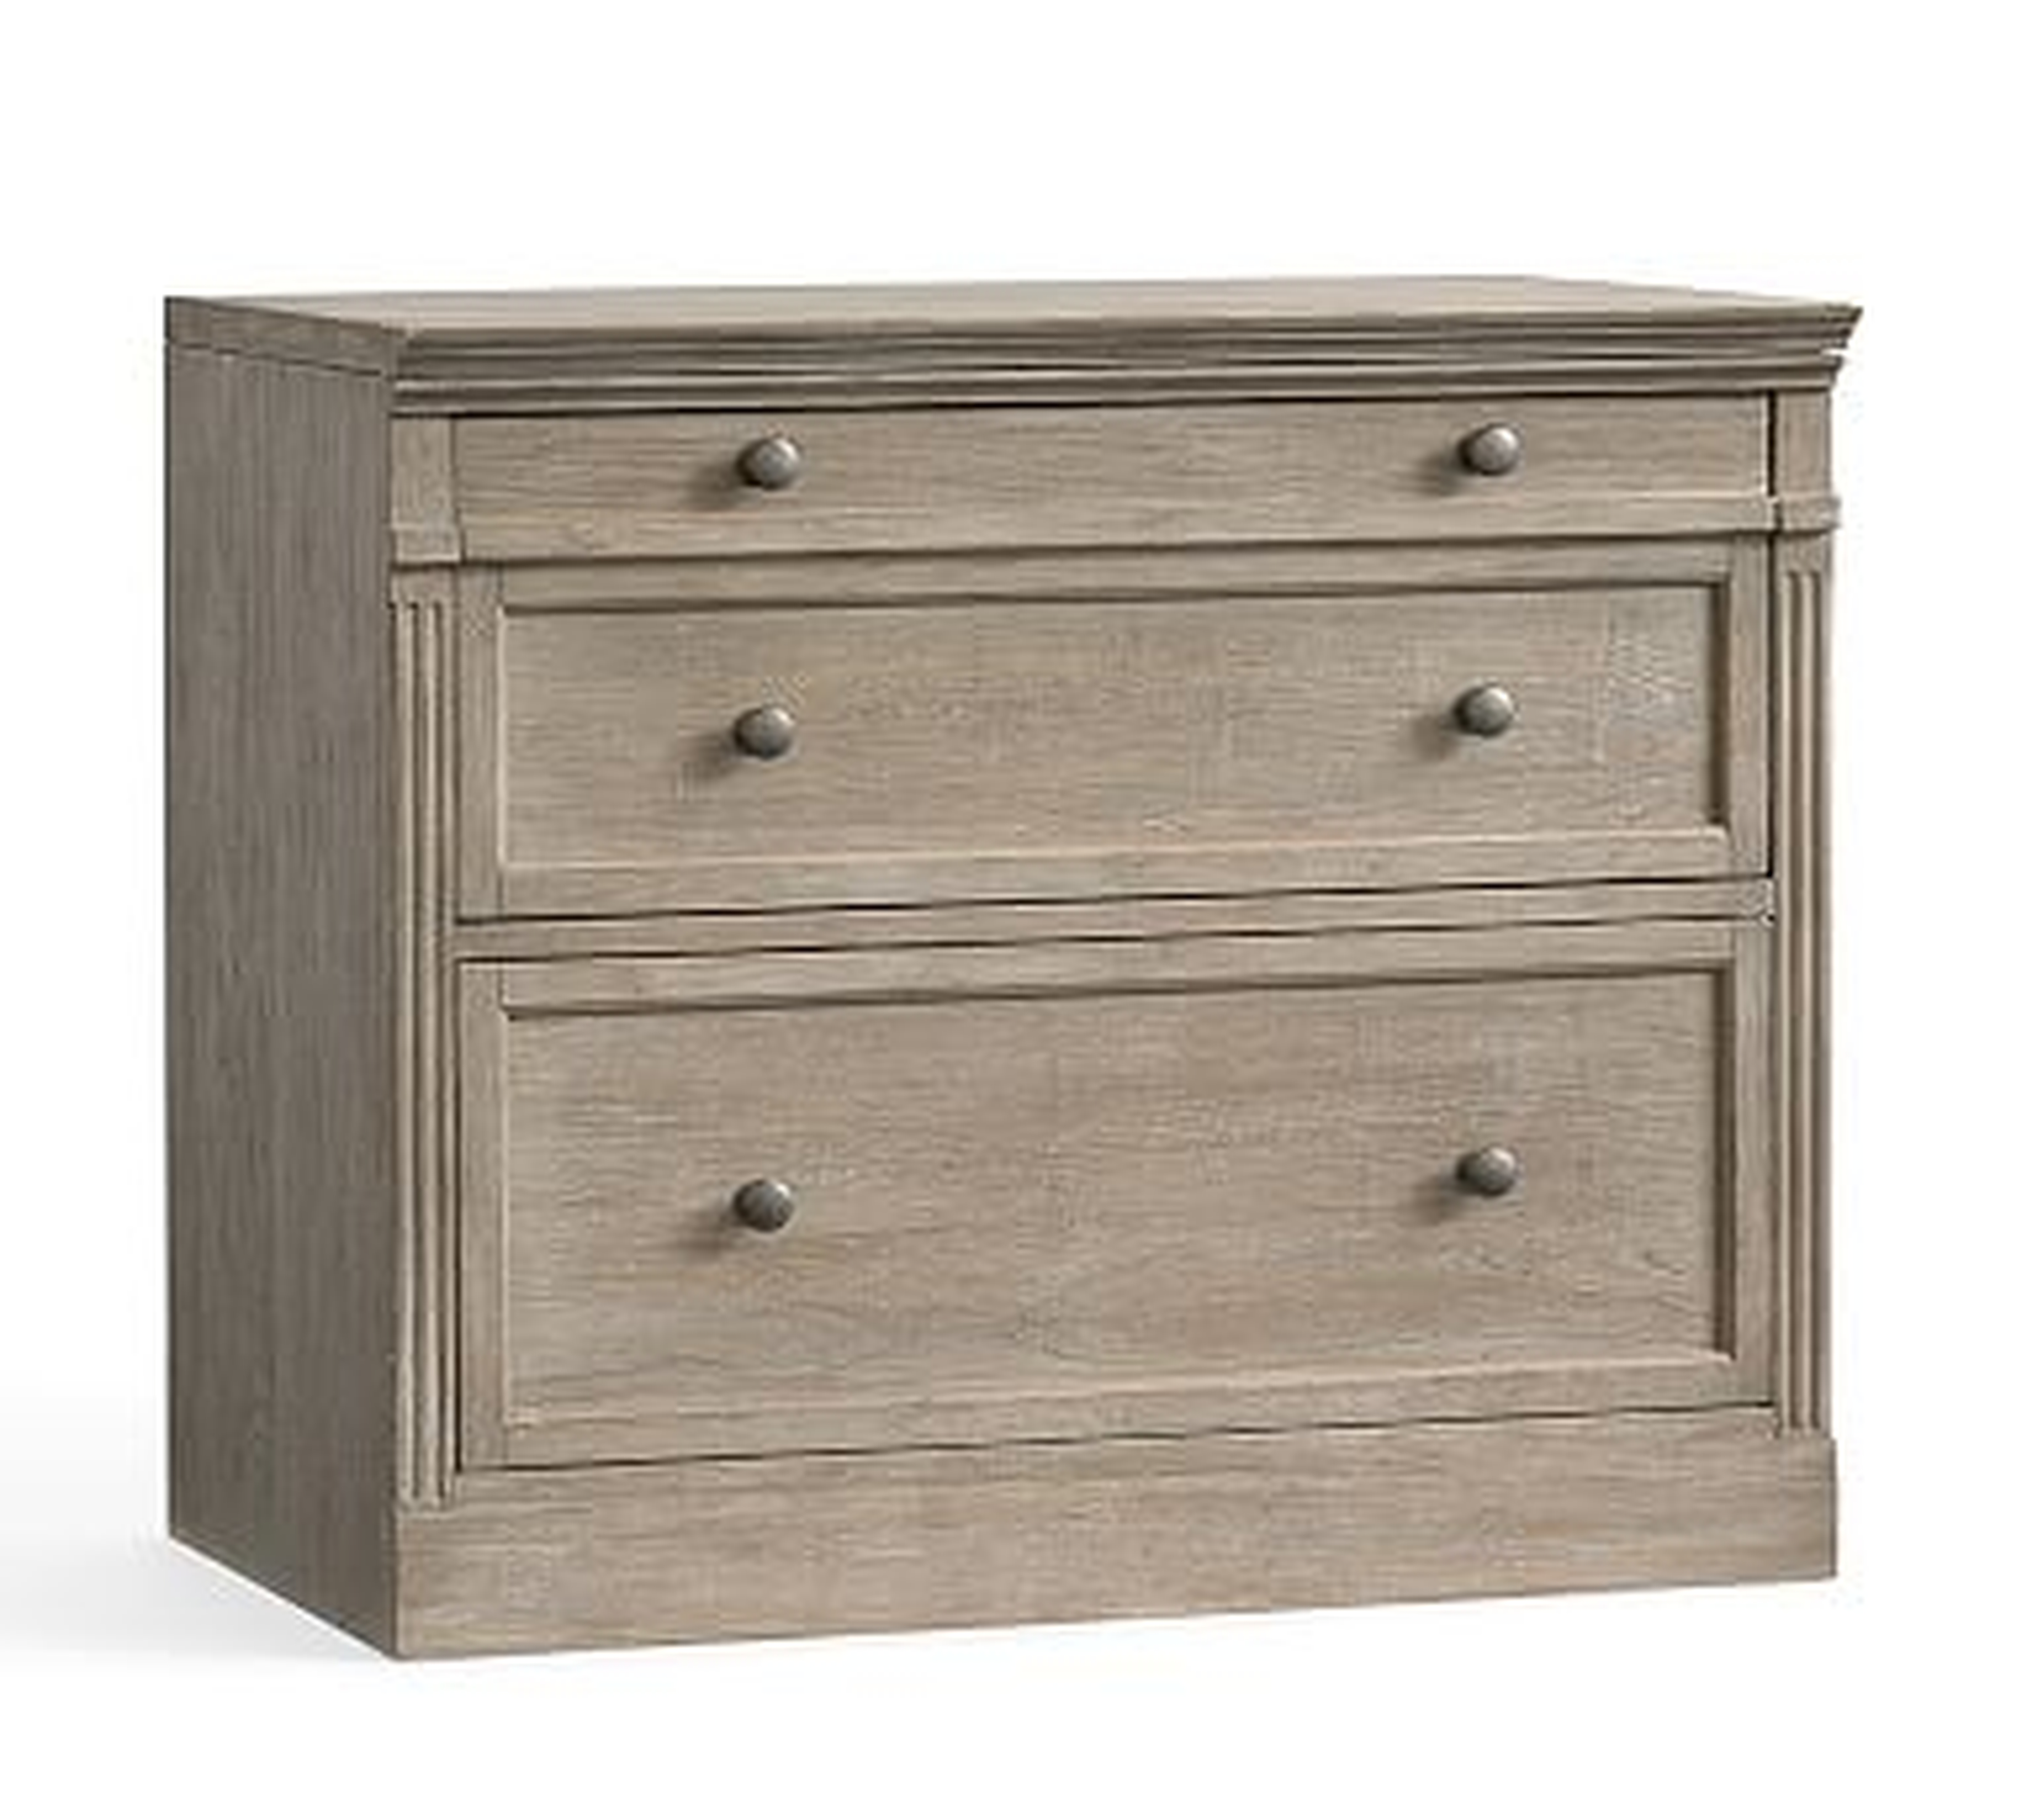 Livingston 2-Drawer Lateral File Cabinet, Gray Wash - Pottery Barn